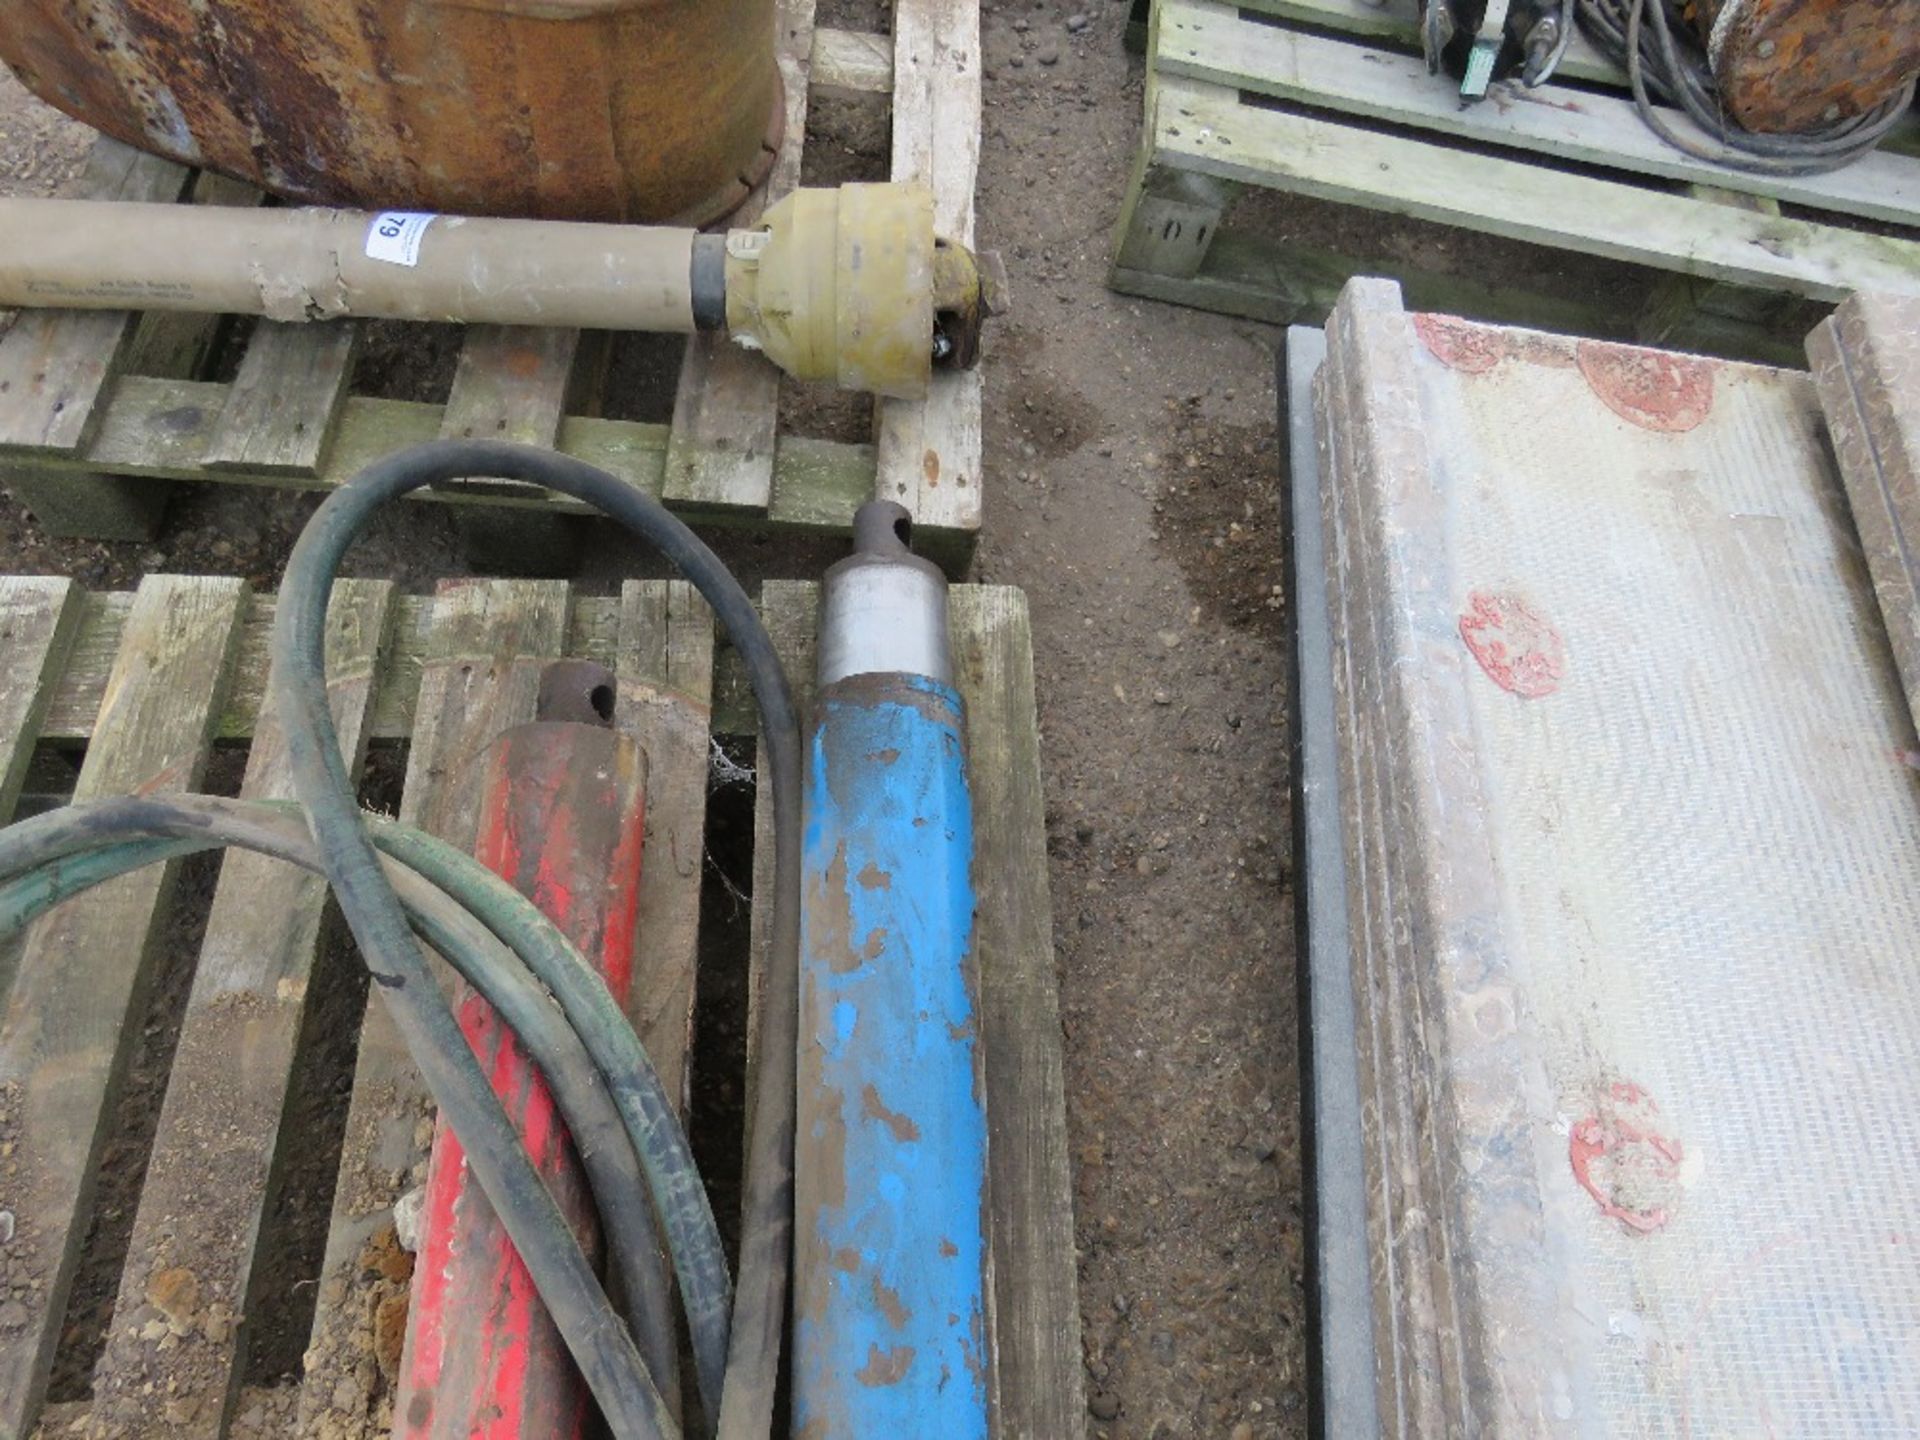 2 X HEAVY DUTY HYDRAULIC RAMS WITH HOSES. - Image 3 of 3